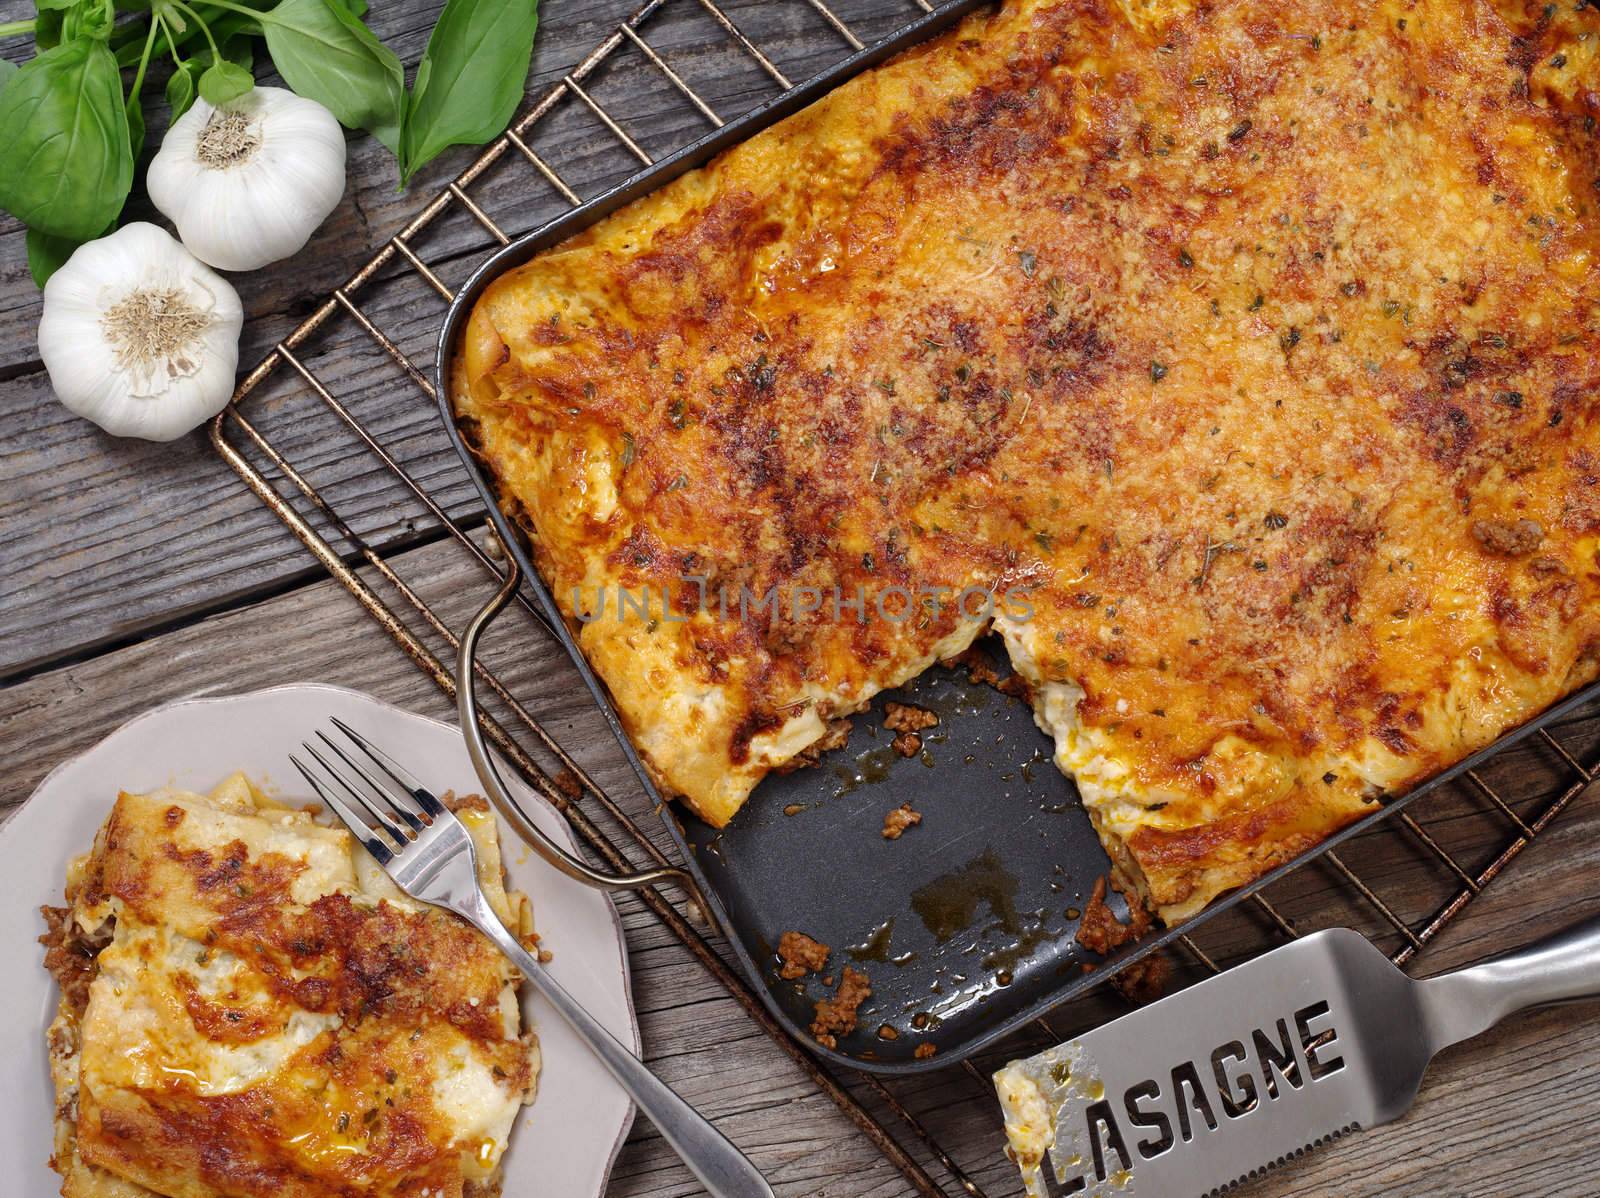 Photo of a freshly baked lasagna, sitting on an old wooden table with a portion cut out and waiting on a plate.